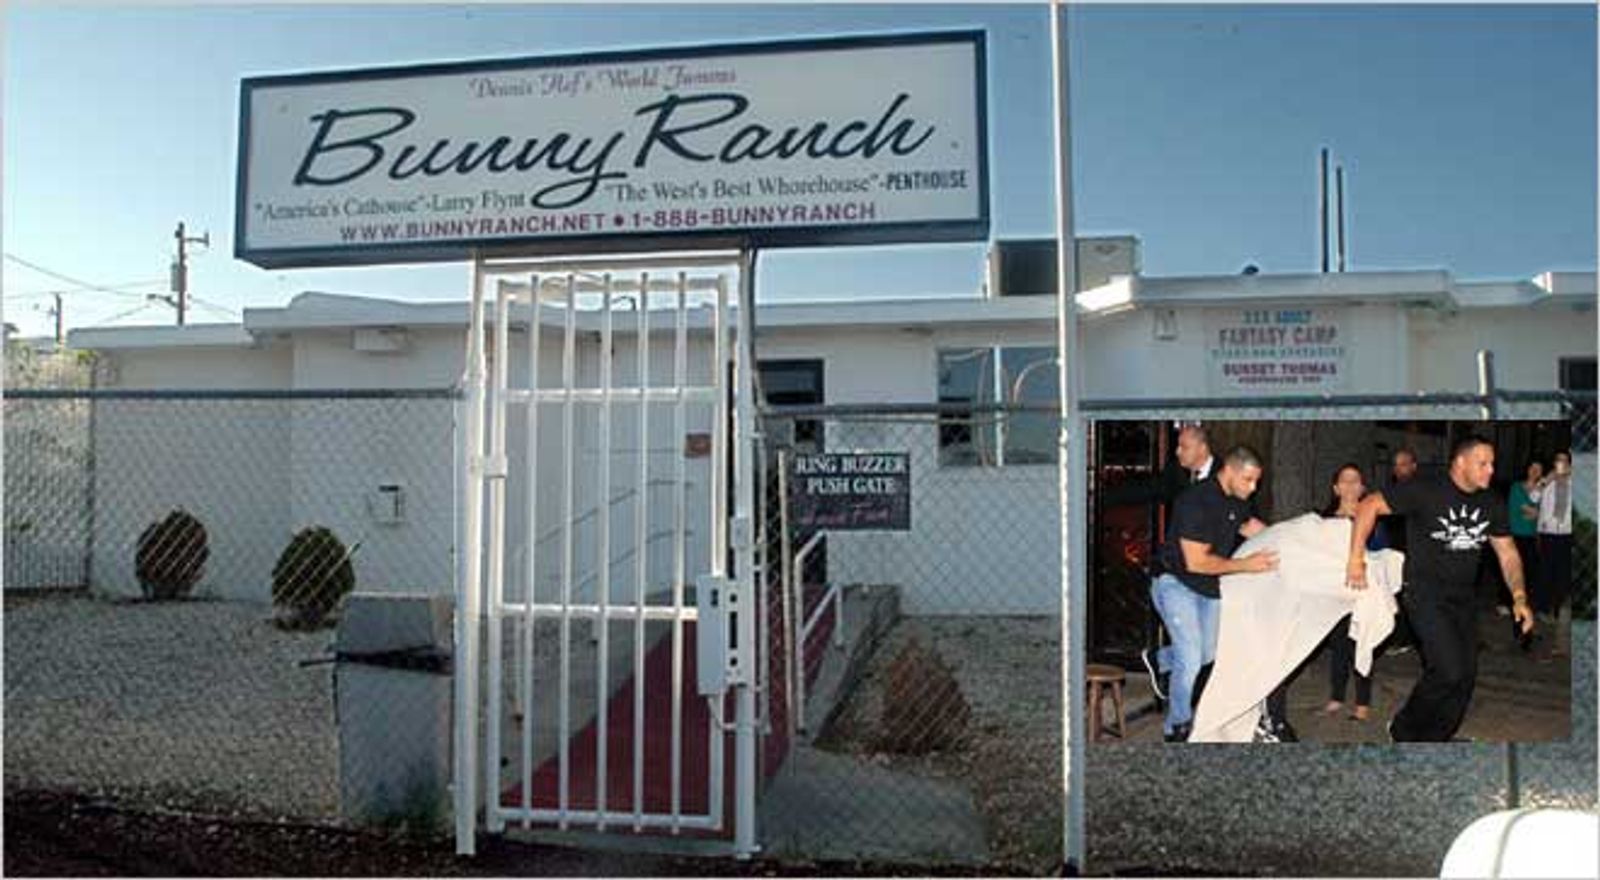 Bunny Ranch Brothel Owner Appeals To Justin Bieber